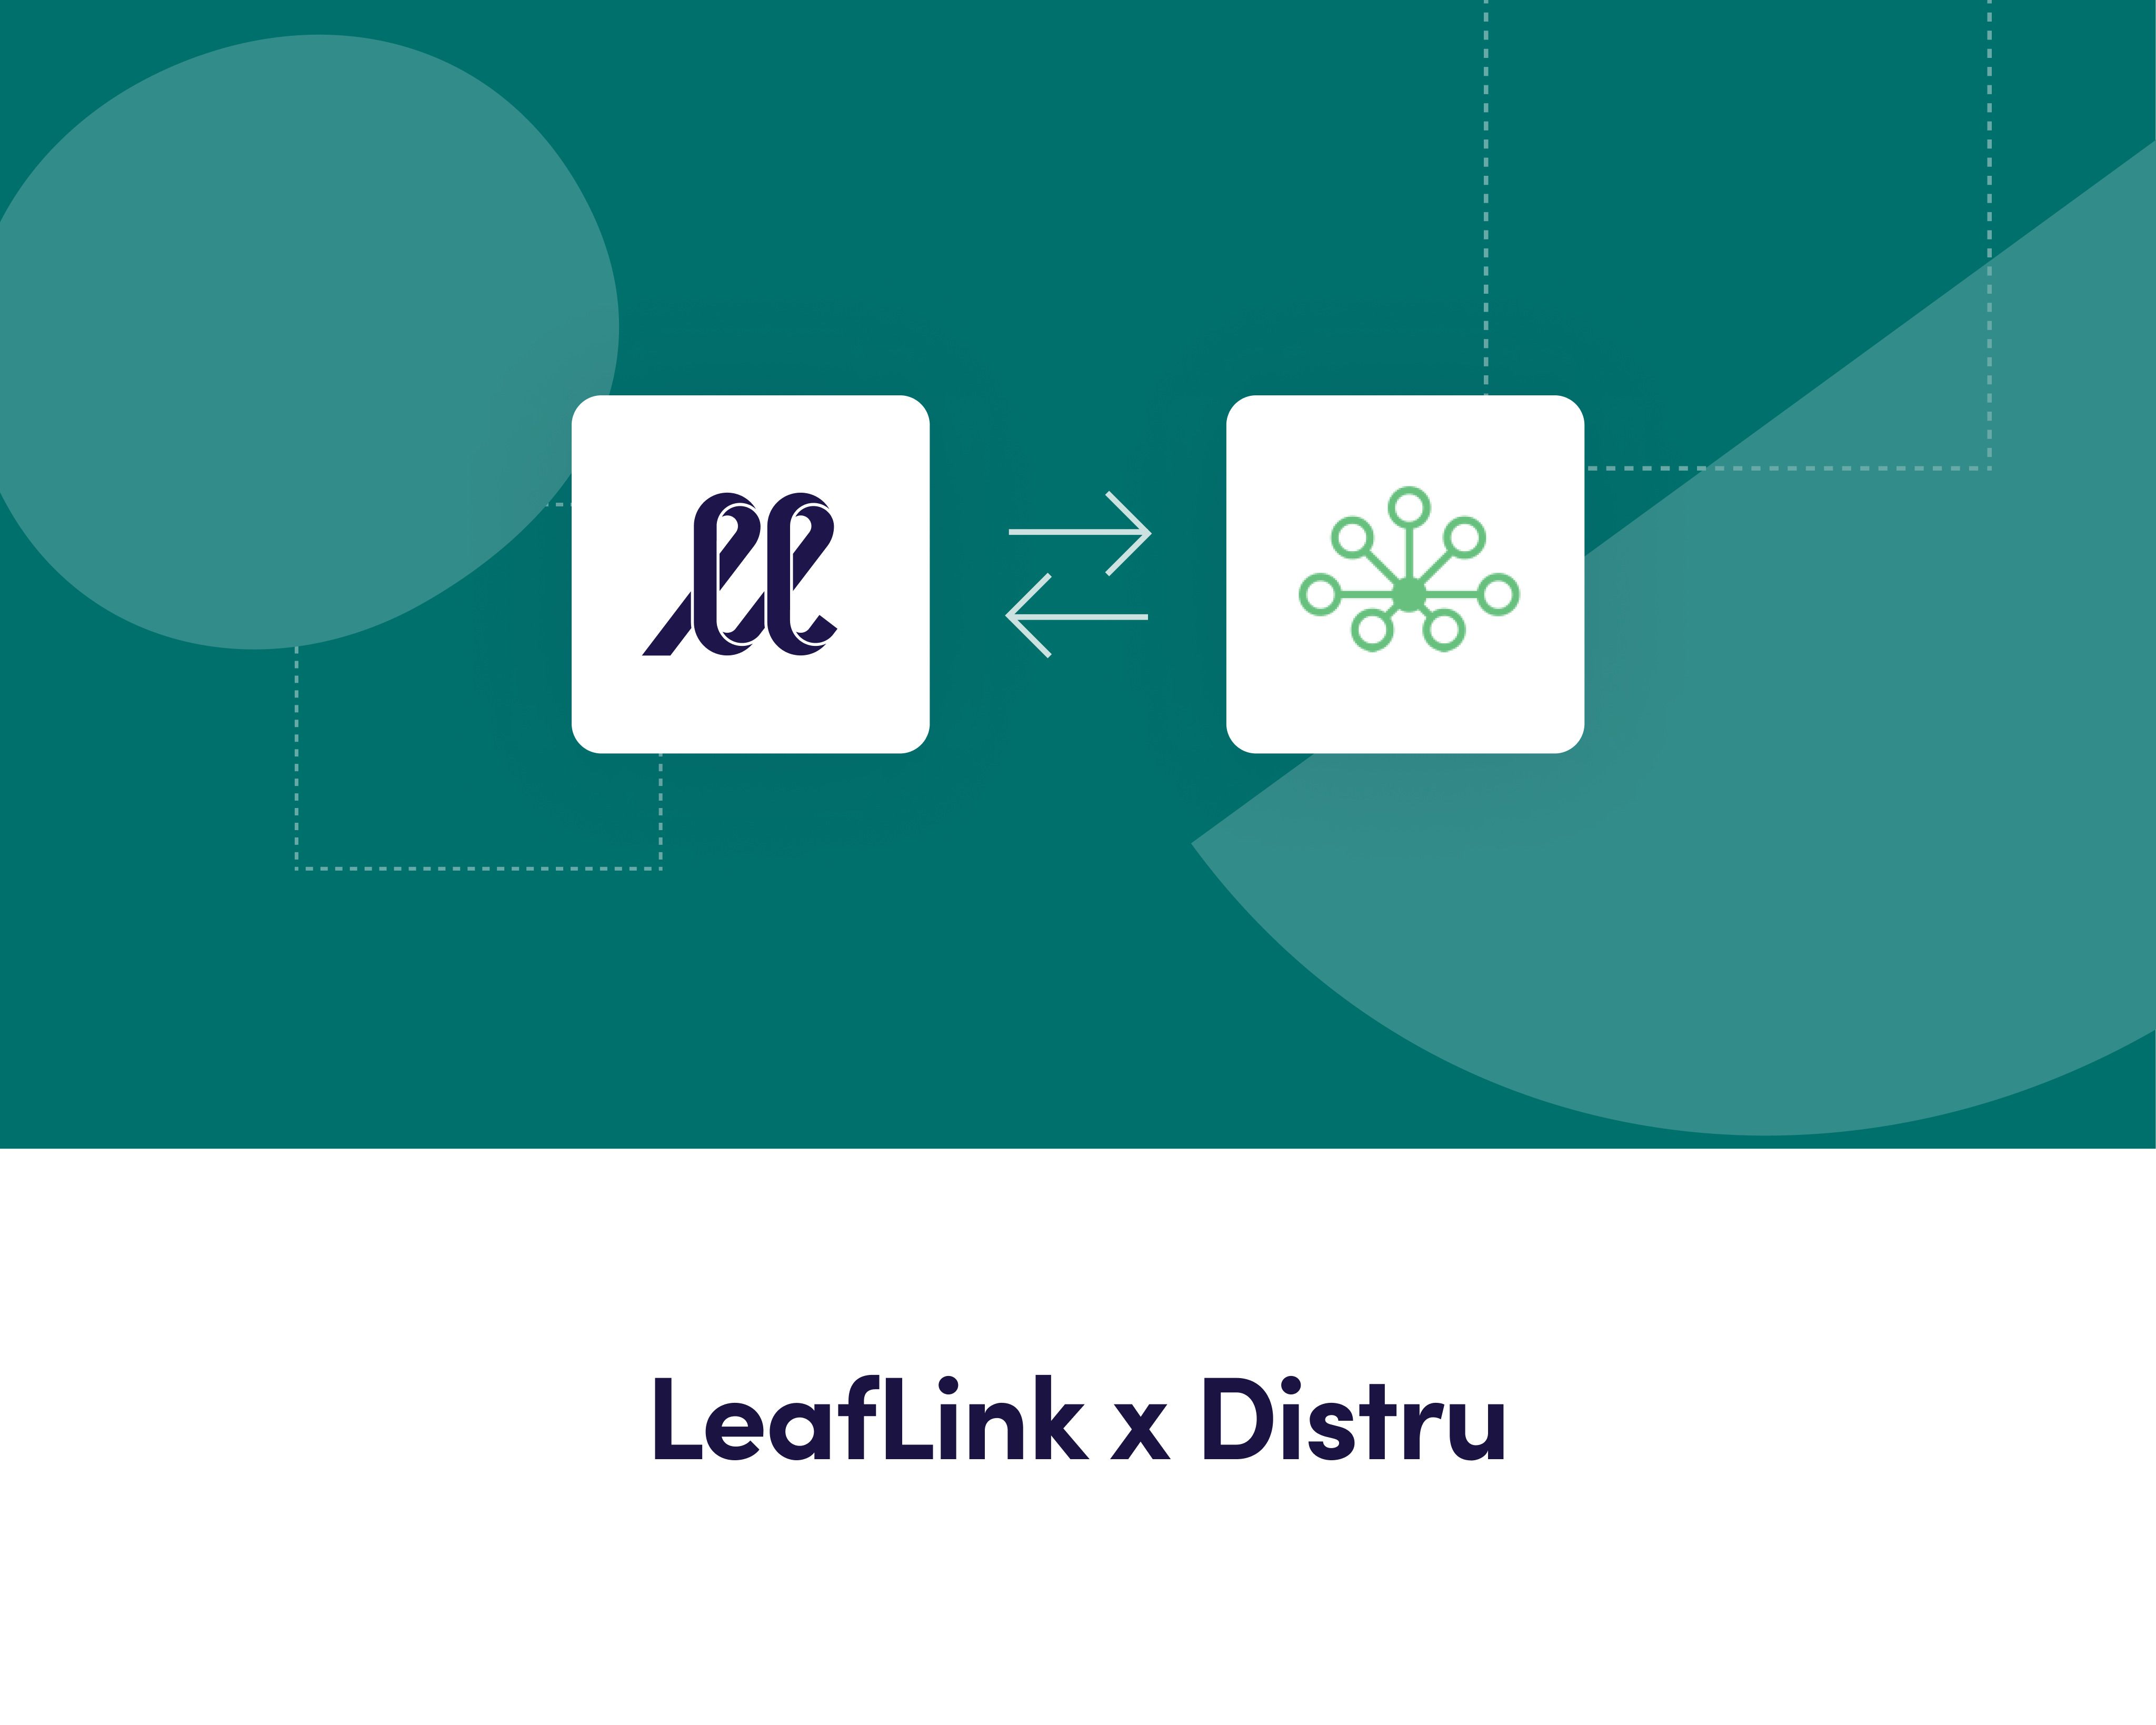 Automate Your Operations With LeafLink X Distru